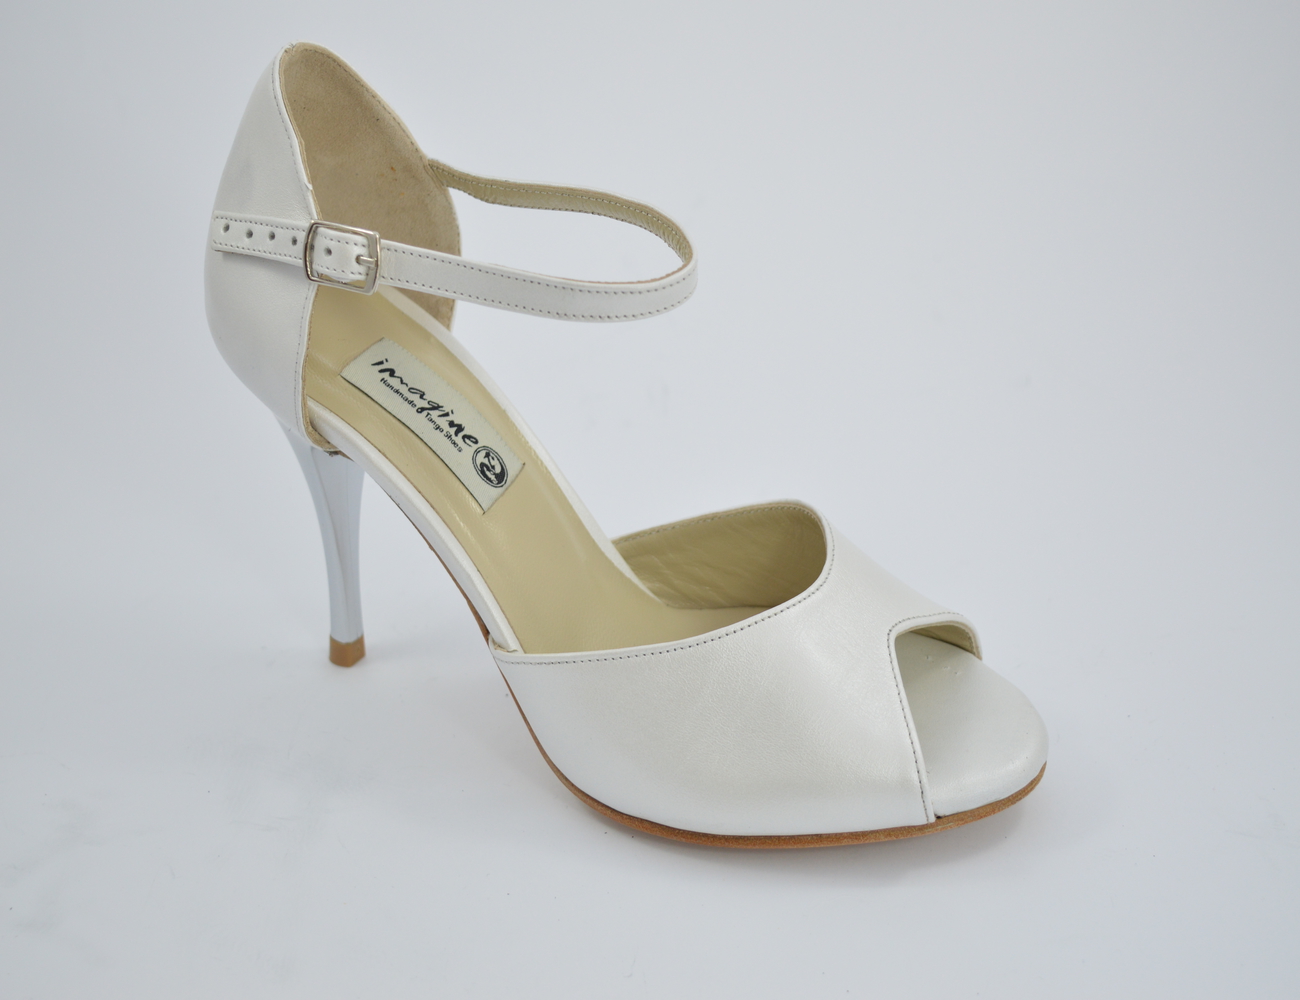 Bridal Shoes, peep toe style, in white pearlized soft leather